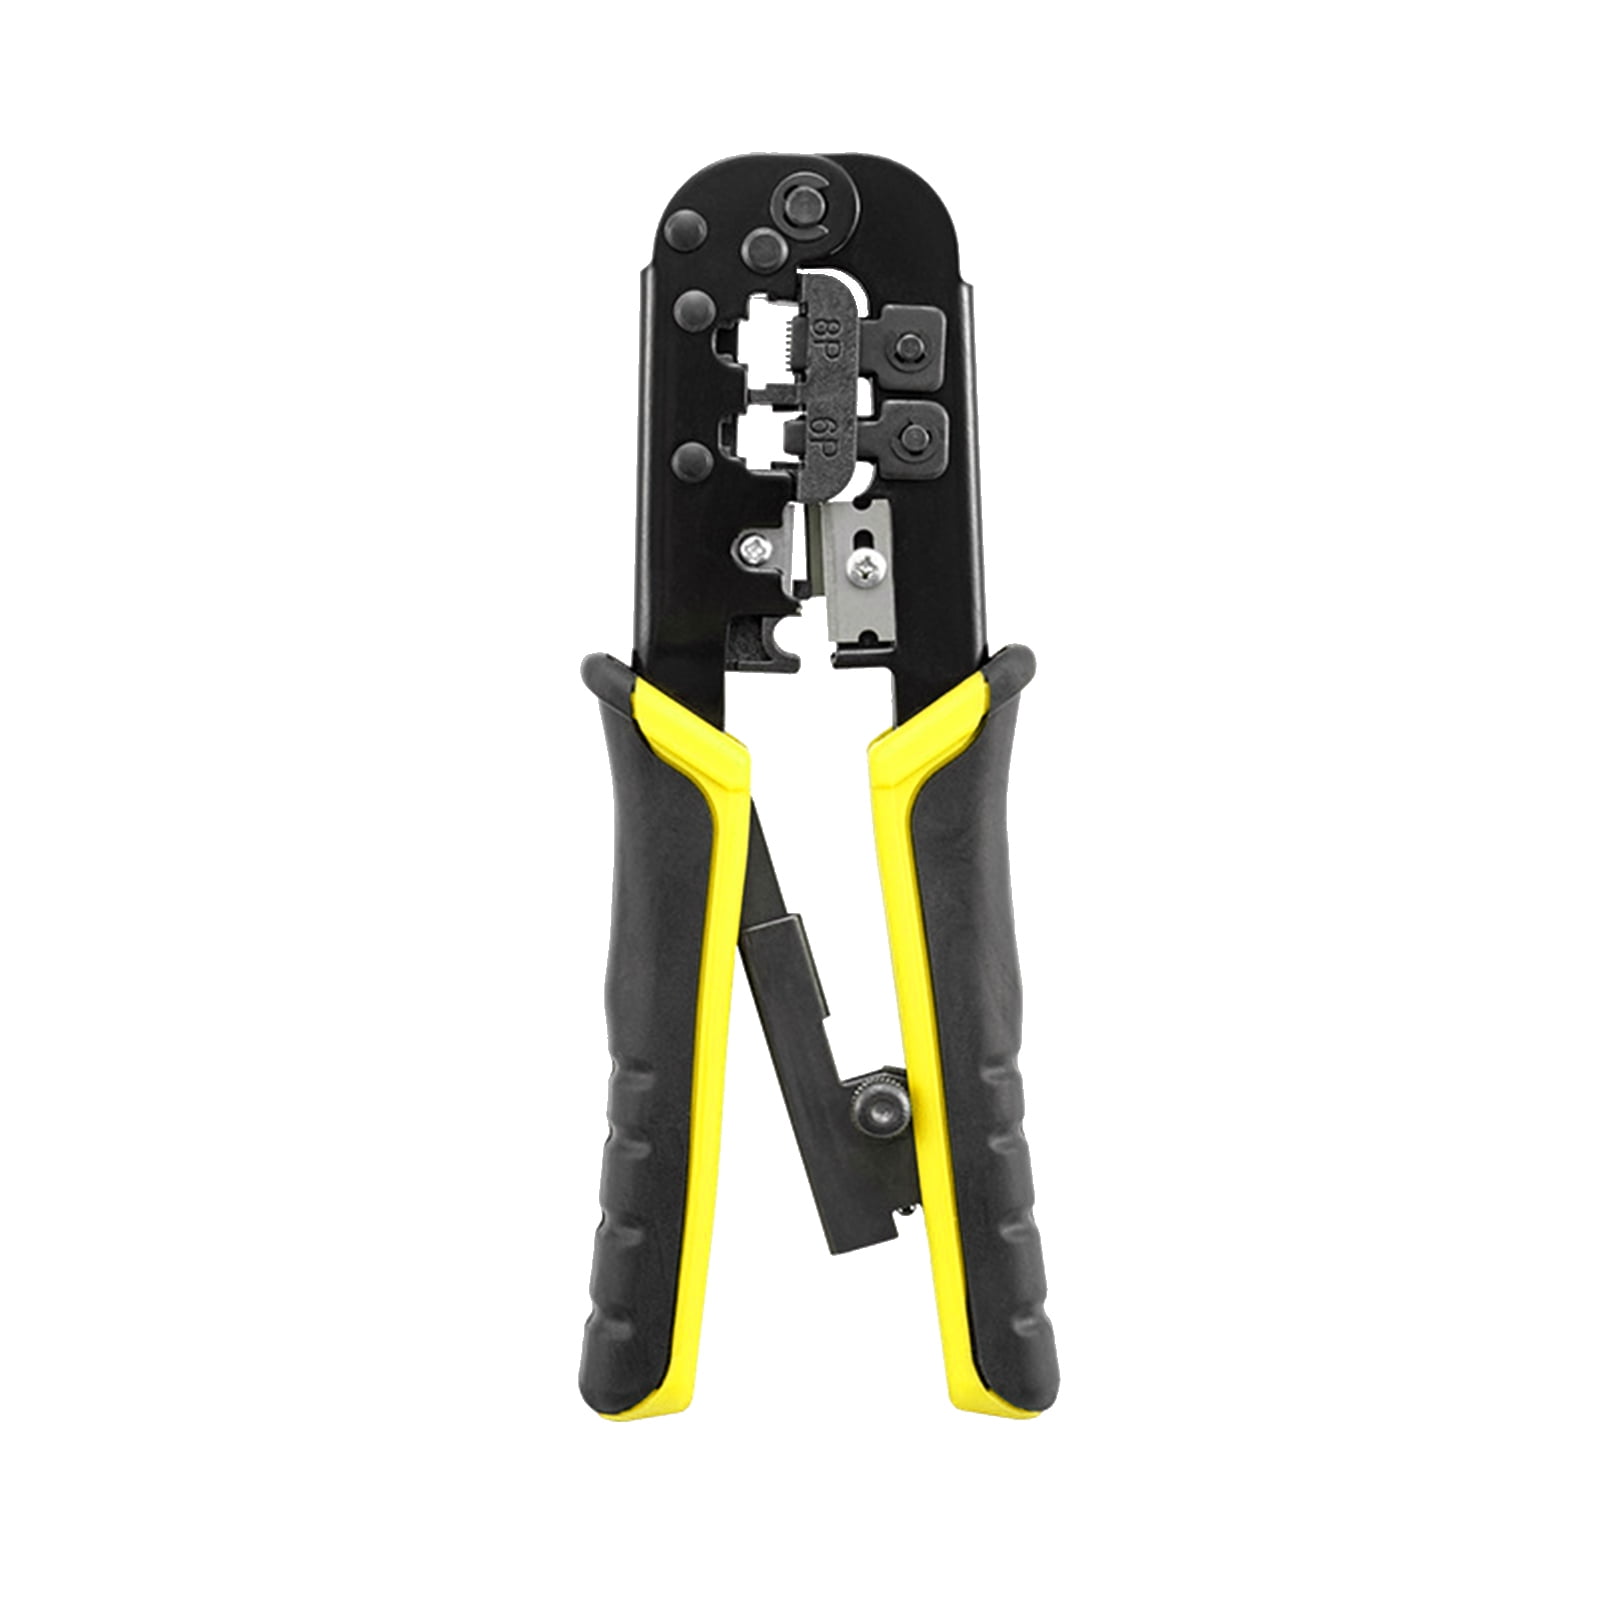 Multi functional wire stripping tool for telephone line network cable and cab-ca 